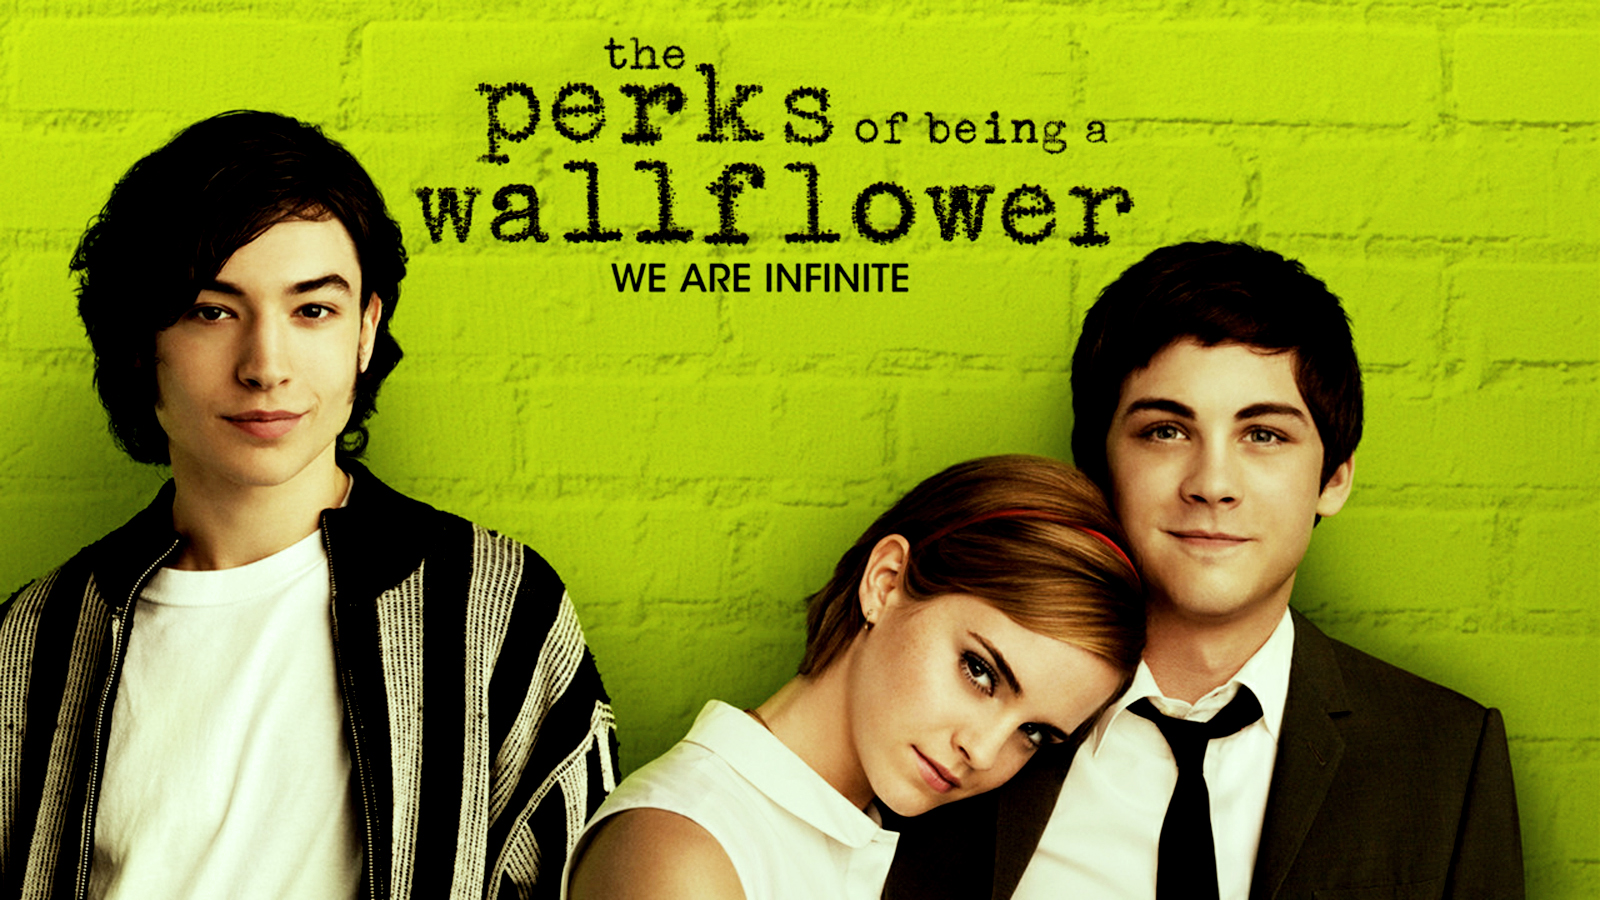 the perks of being a wallflower wallpaper,movie,album cover,smile